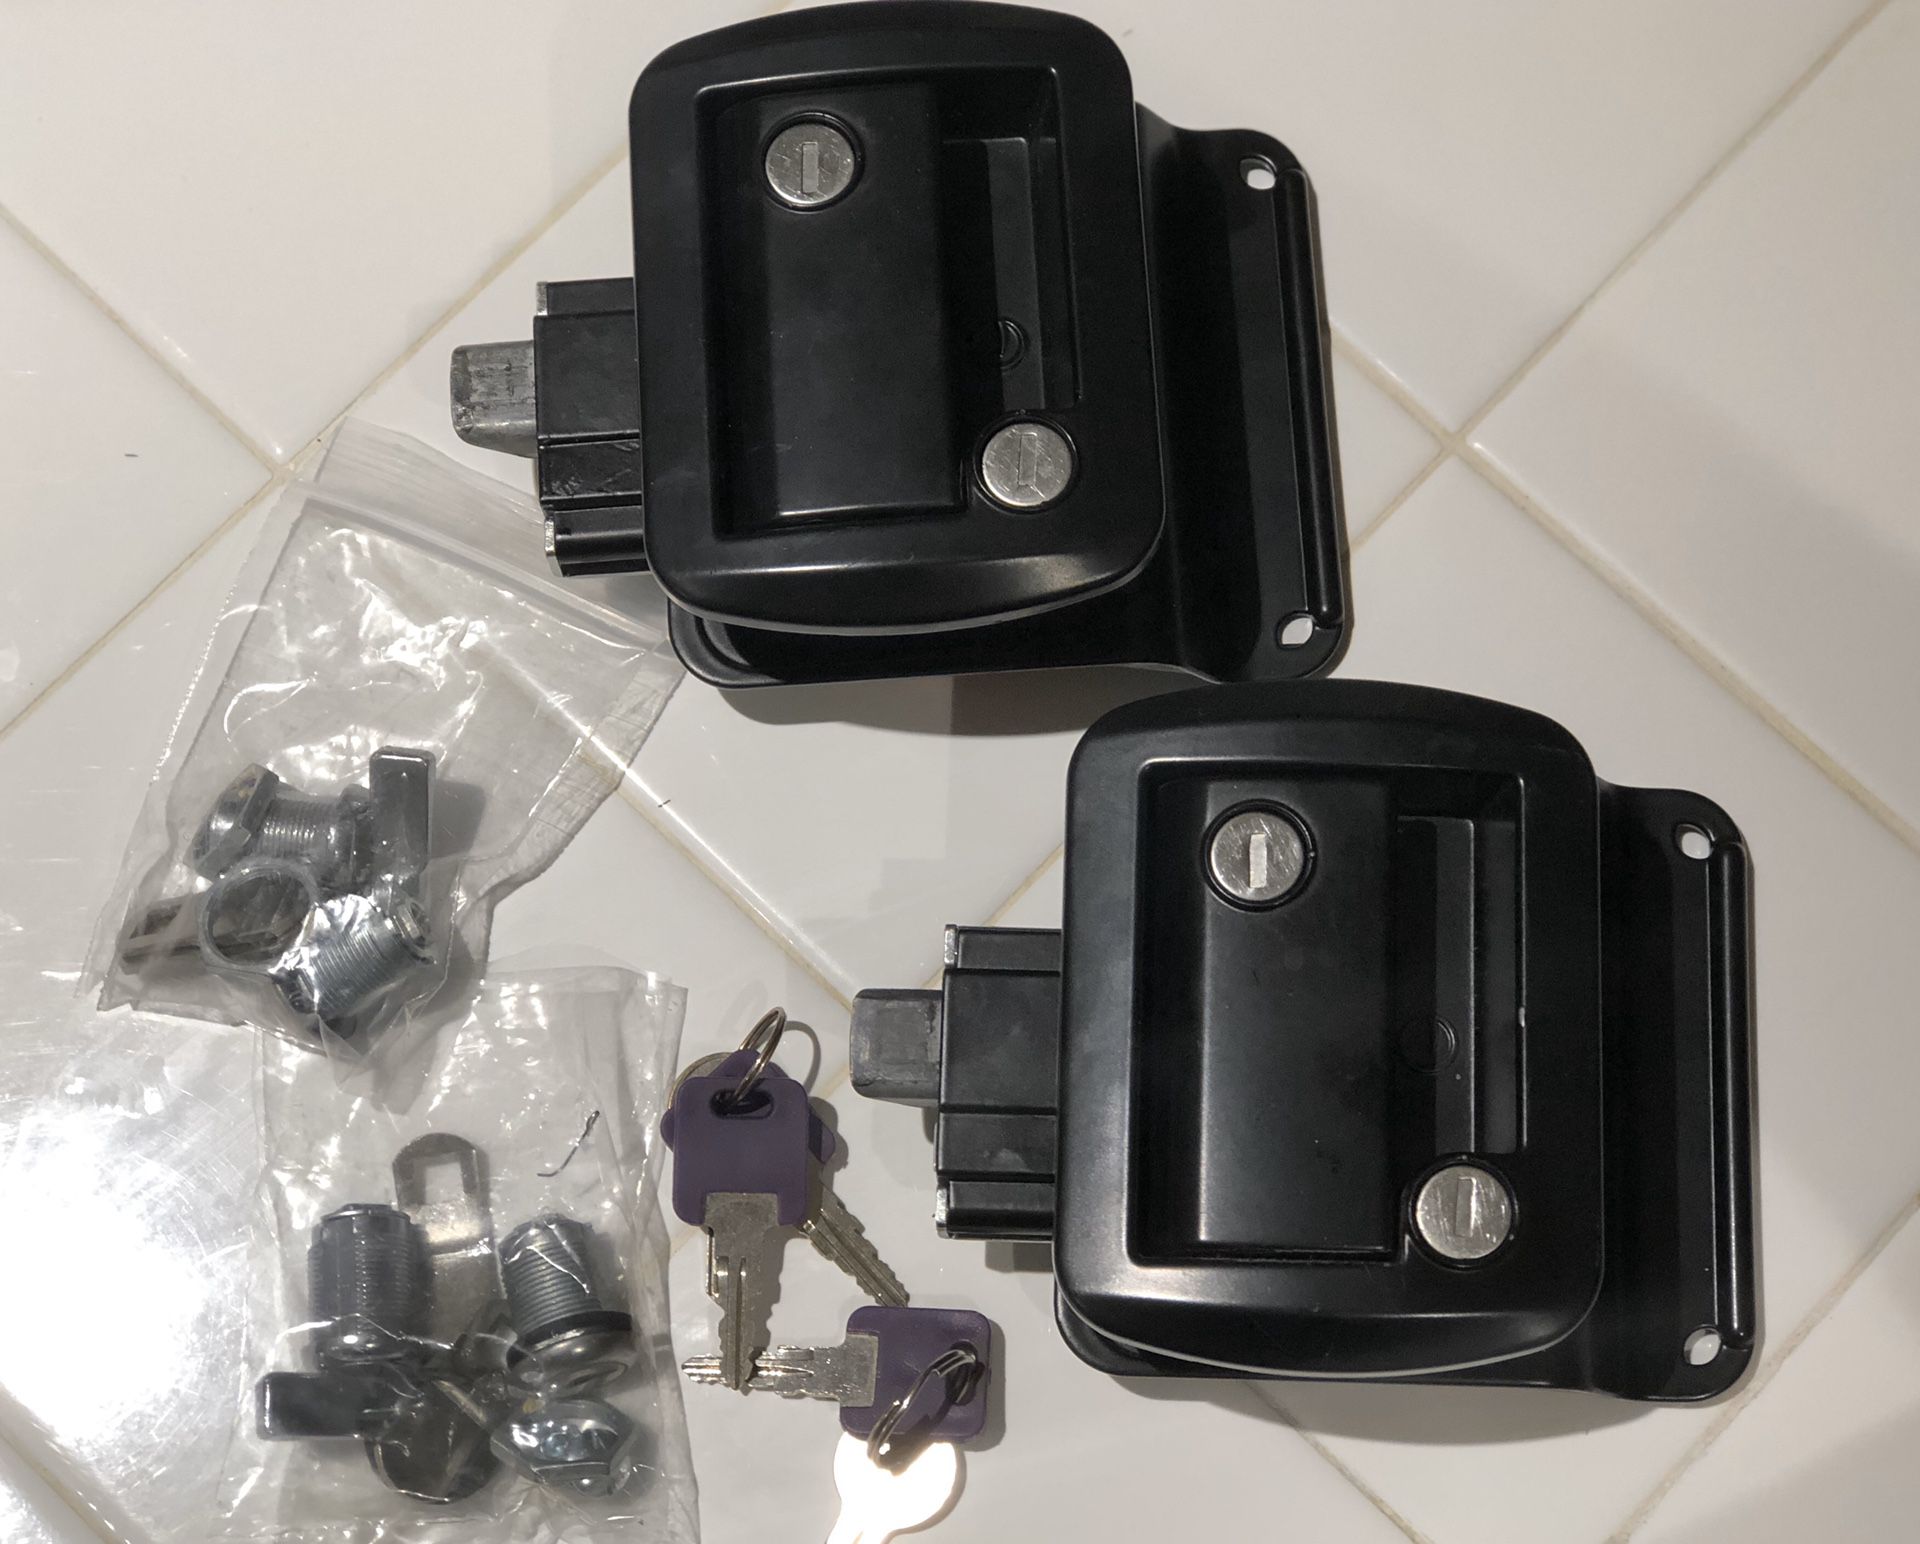 2 Travel trailer locks with keys and 2 storage compartment locks and keys.